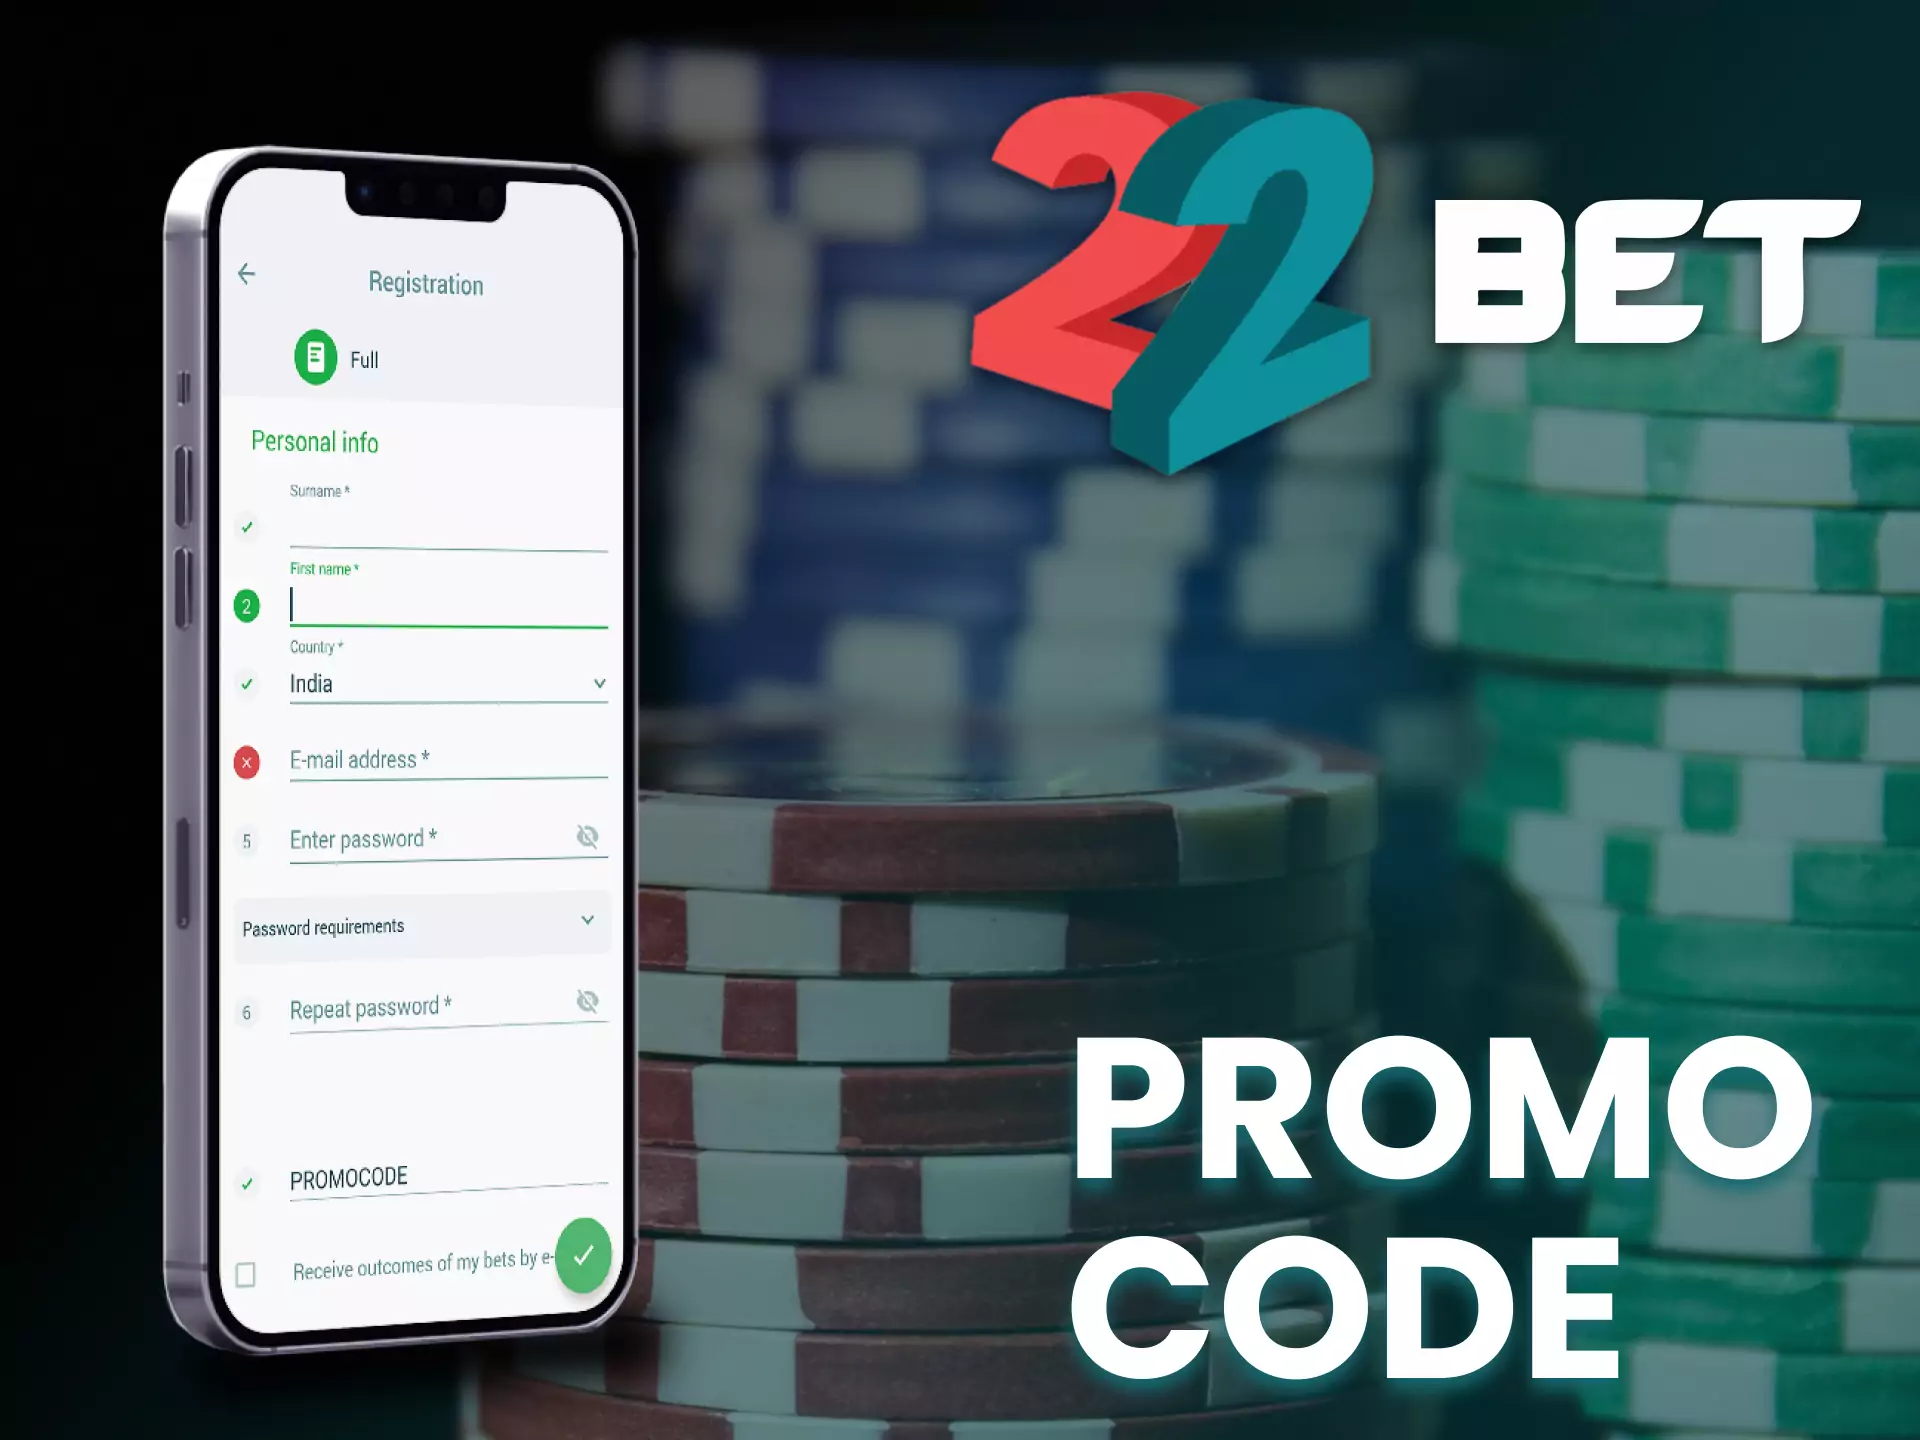 Be sure to apply a special promo code for 22bet .